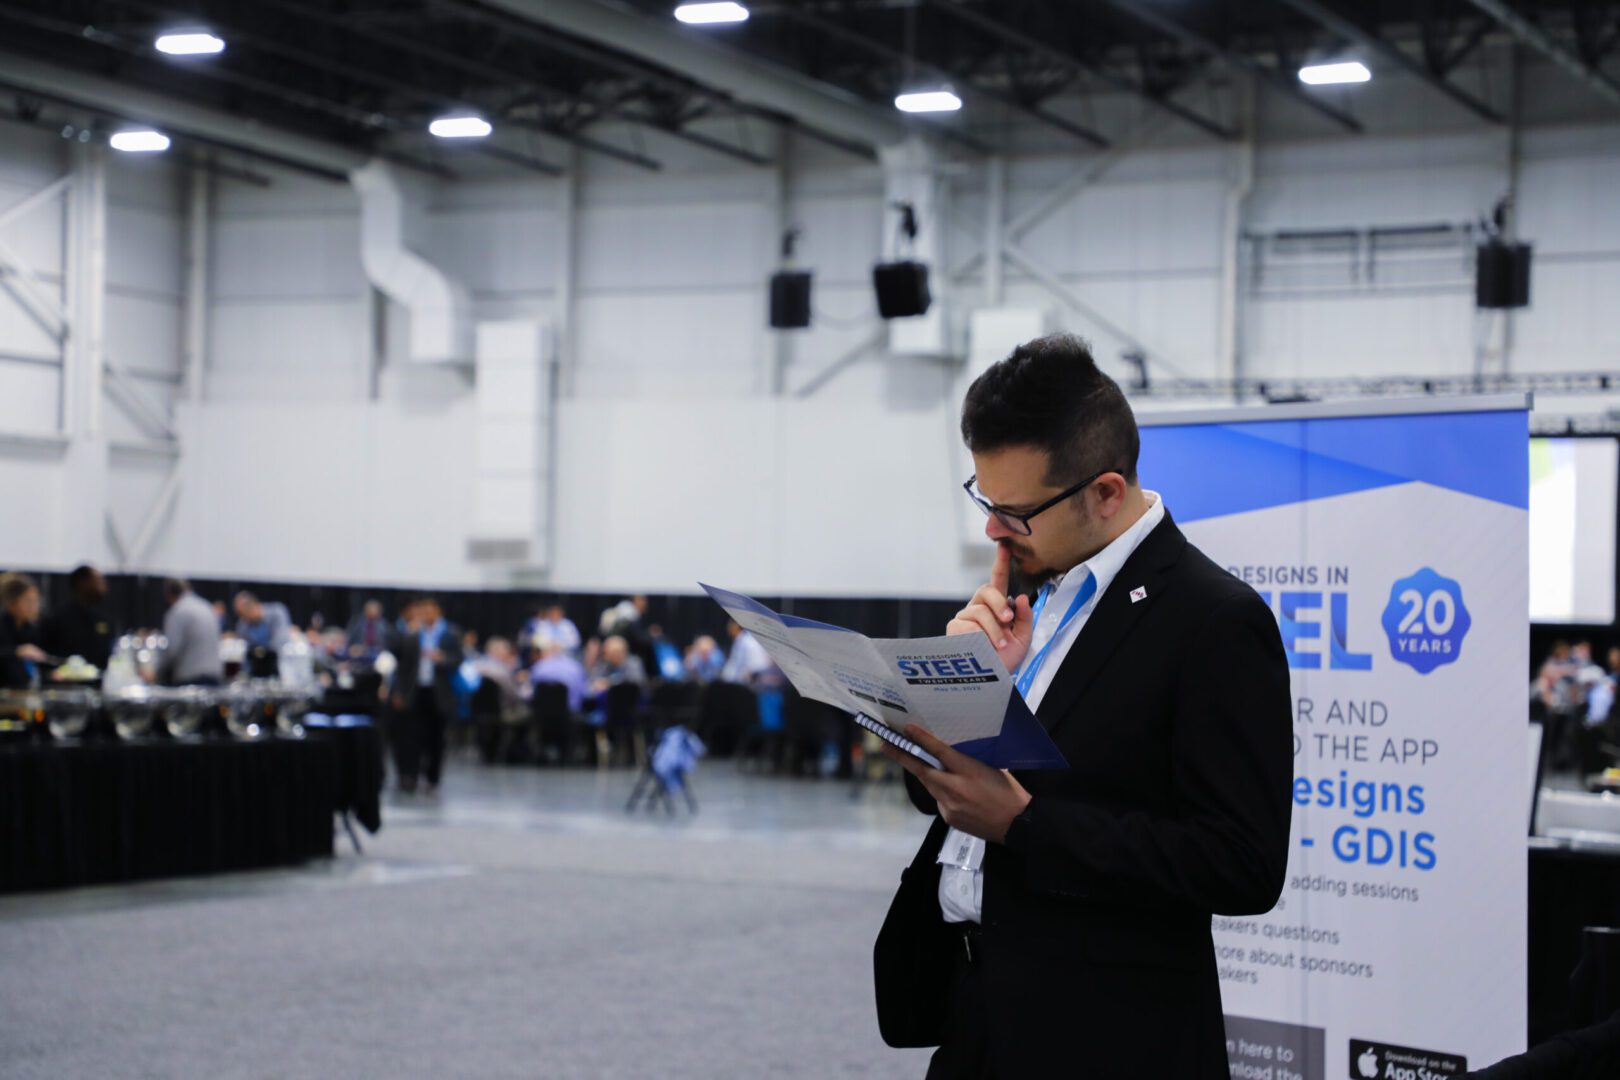 A man in black suit reading papers at an event.